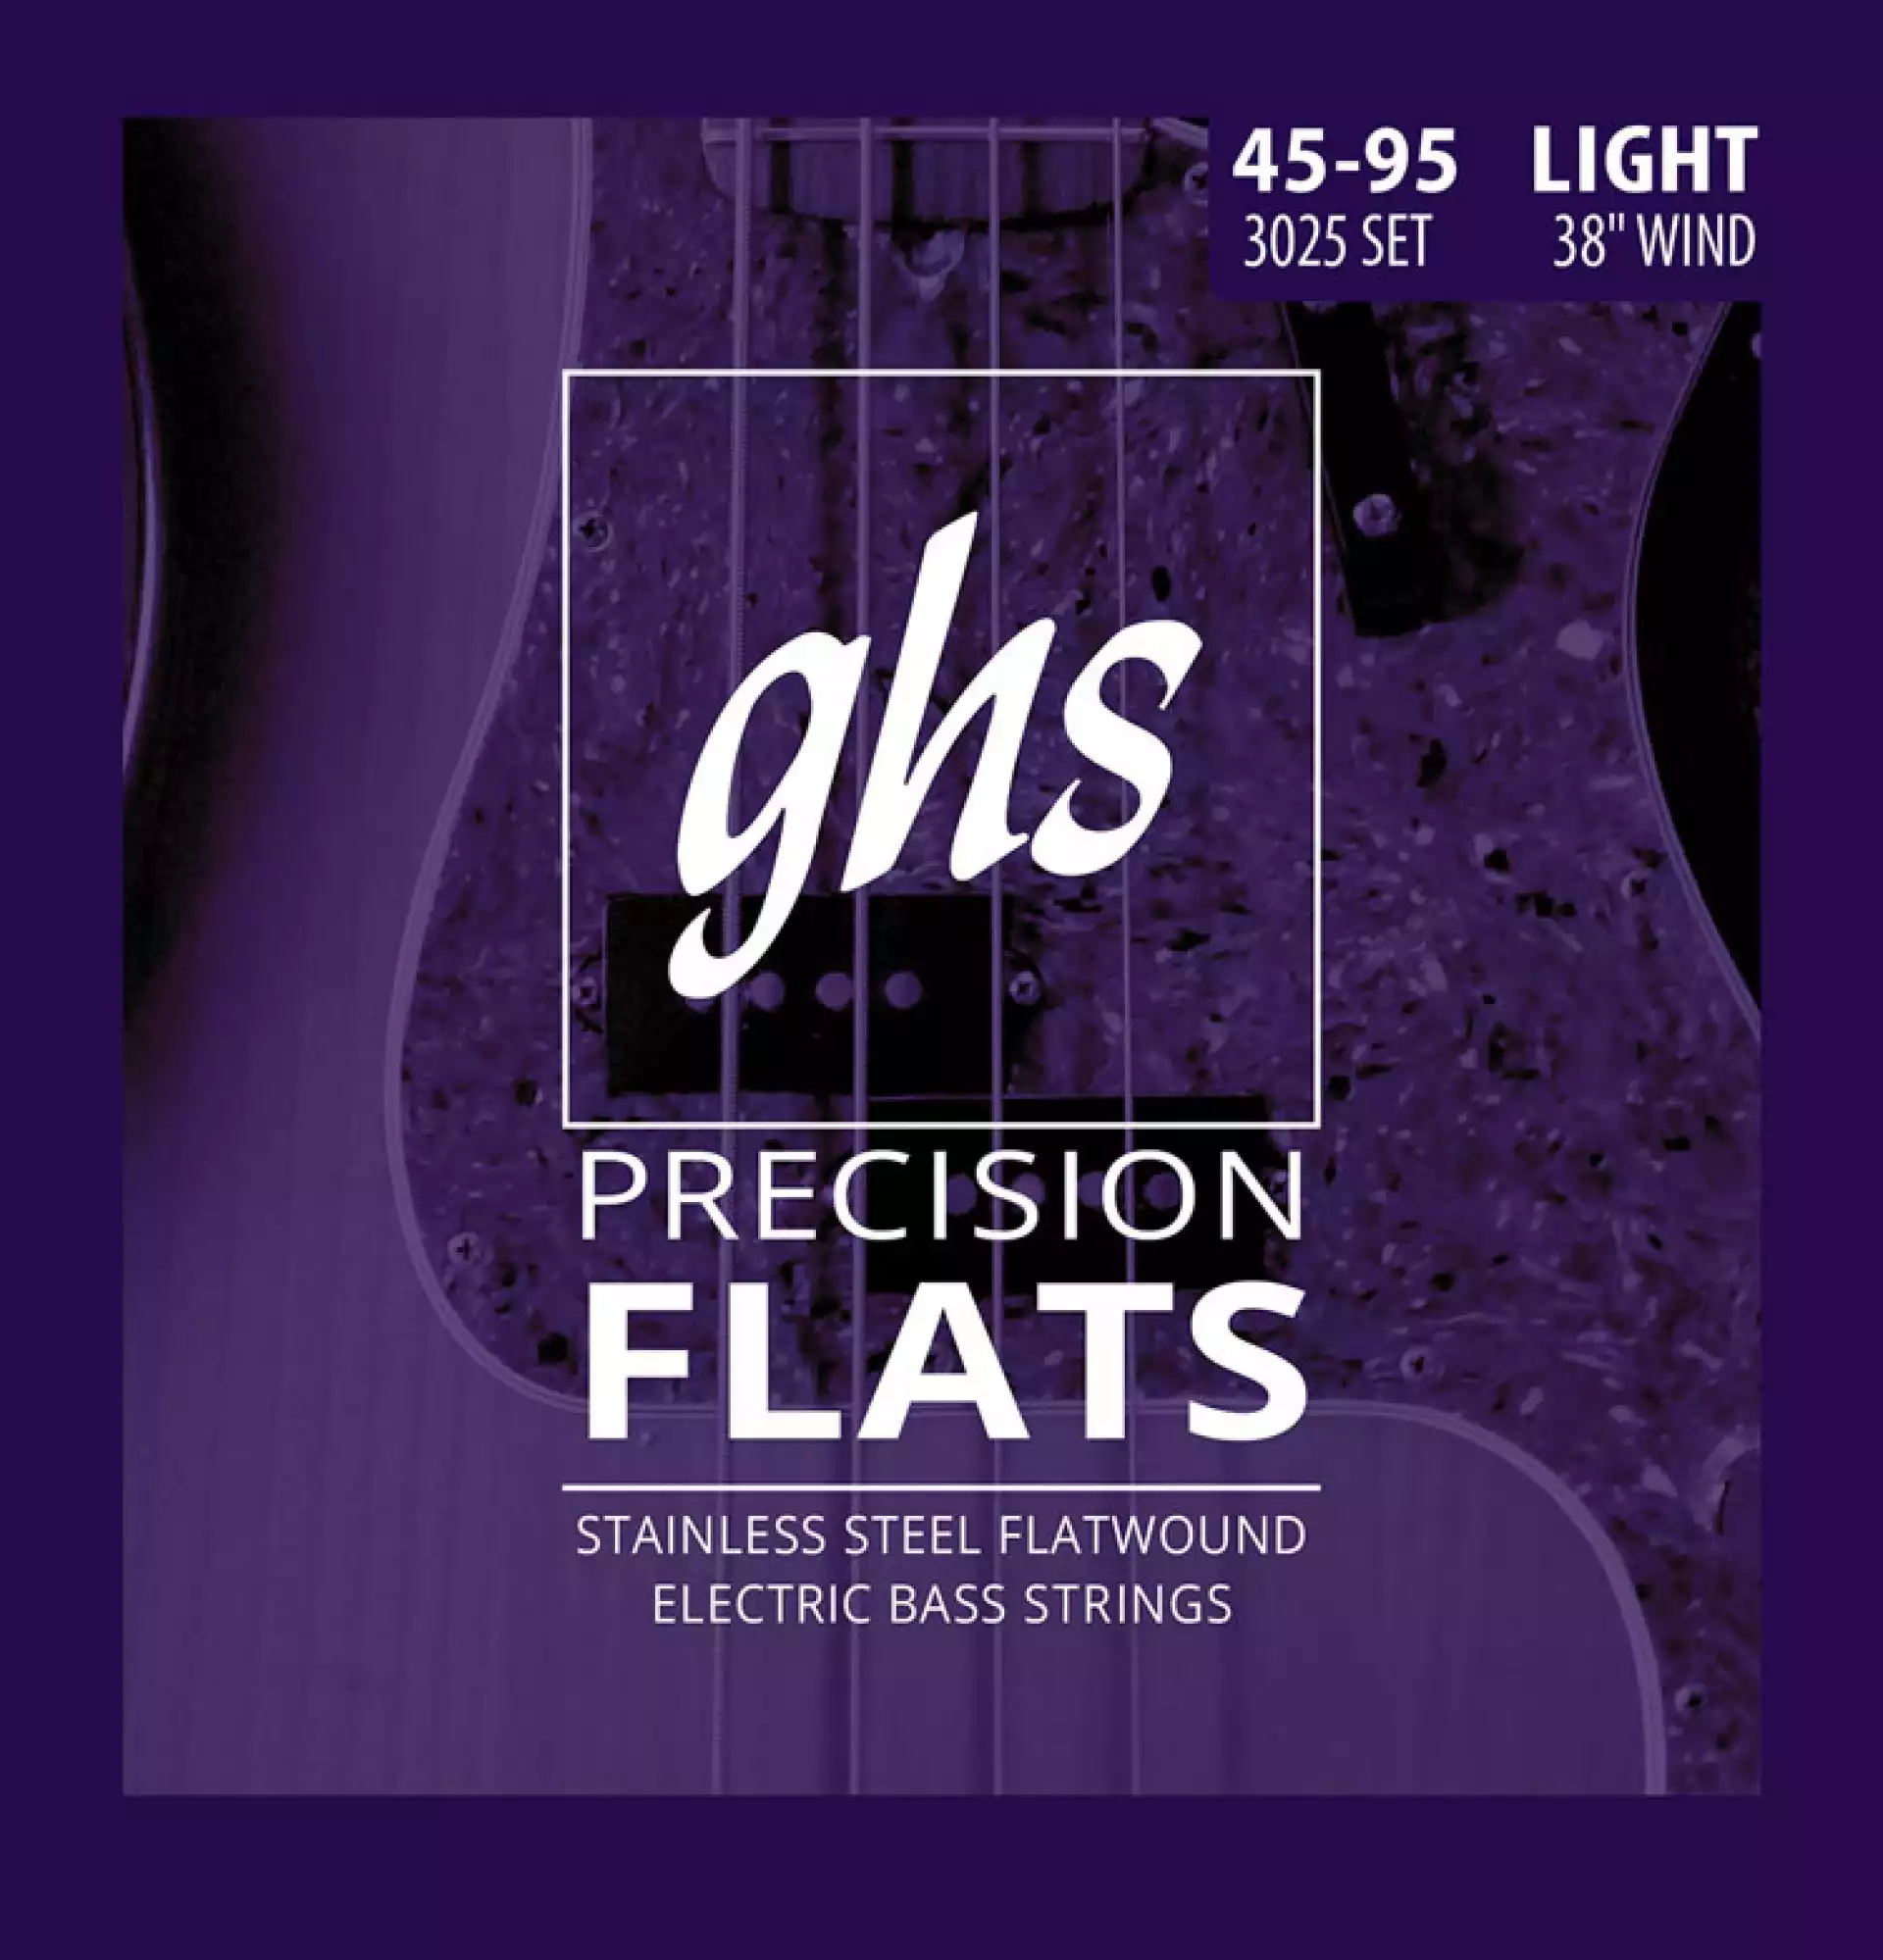 GHS 3025 Precision Flats Flatwound Bass Strings Long Scale Plus - 4-String 45-095 Light